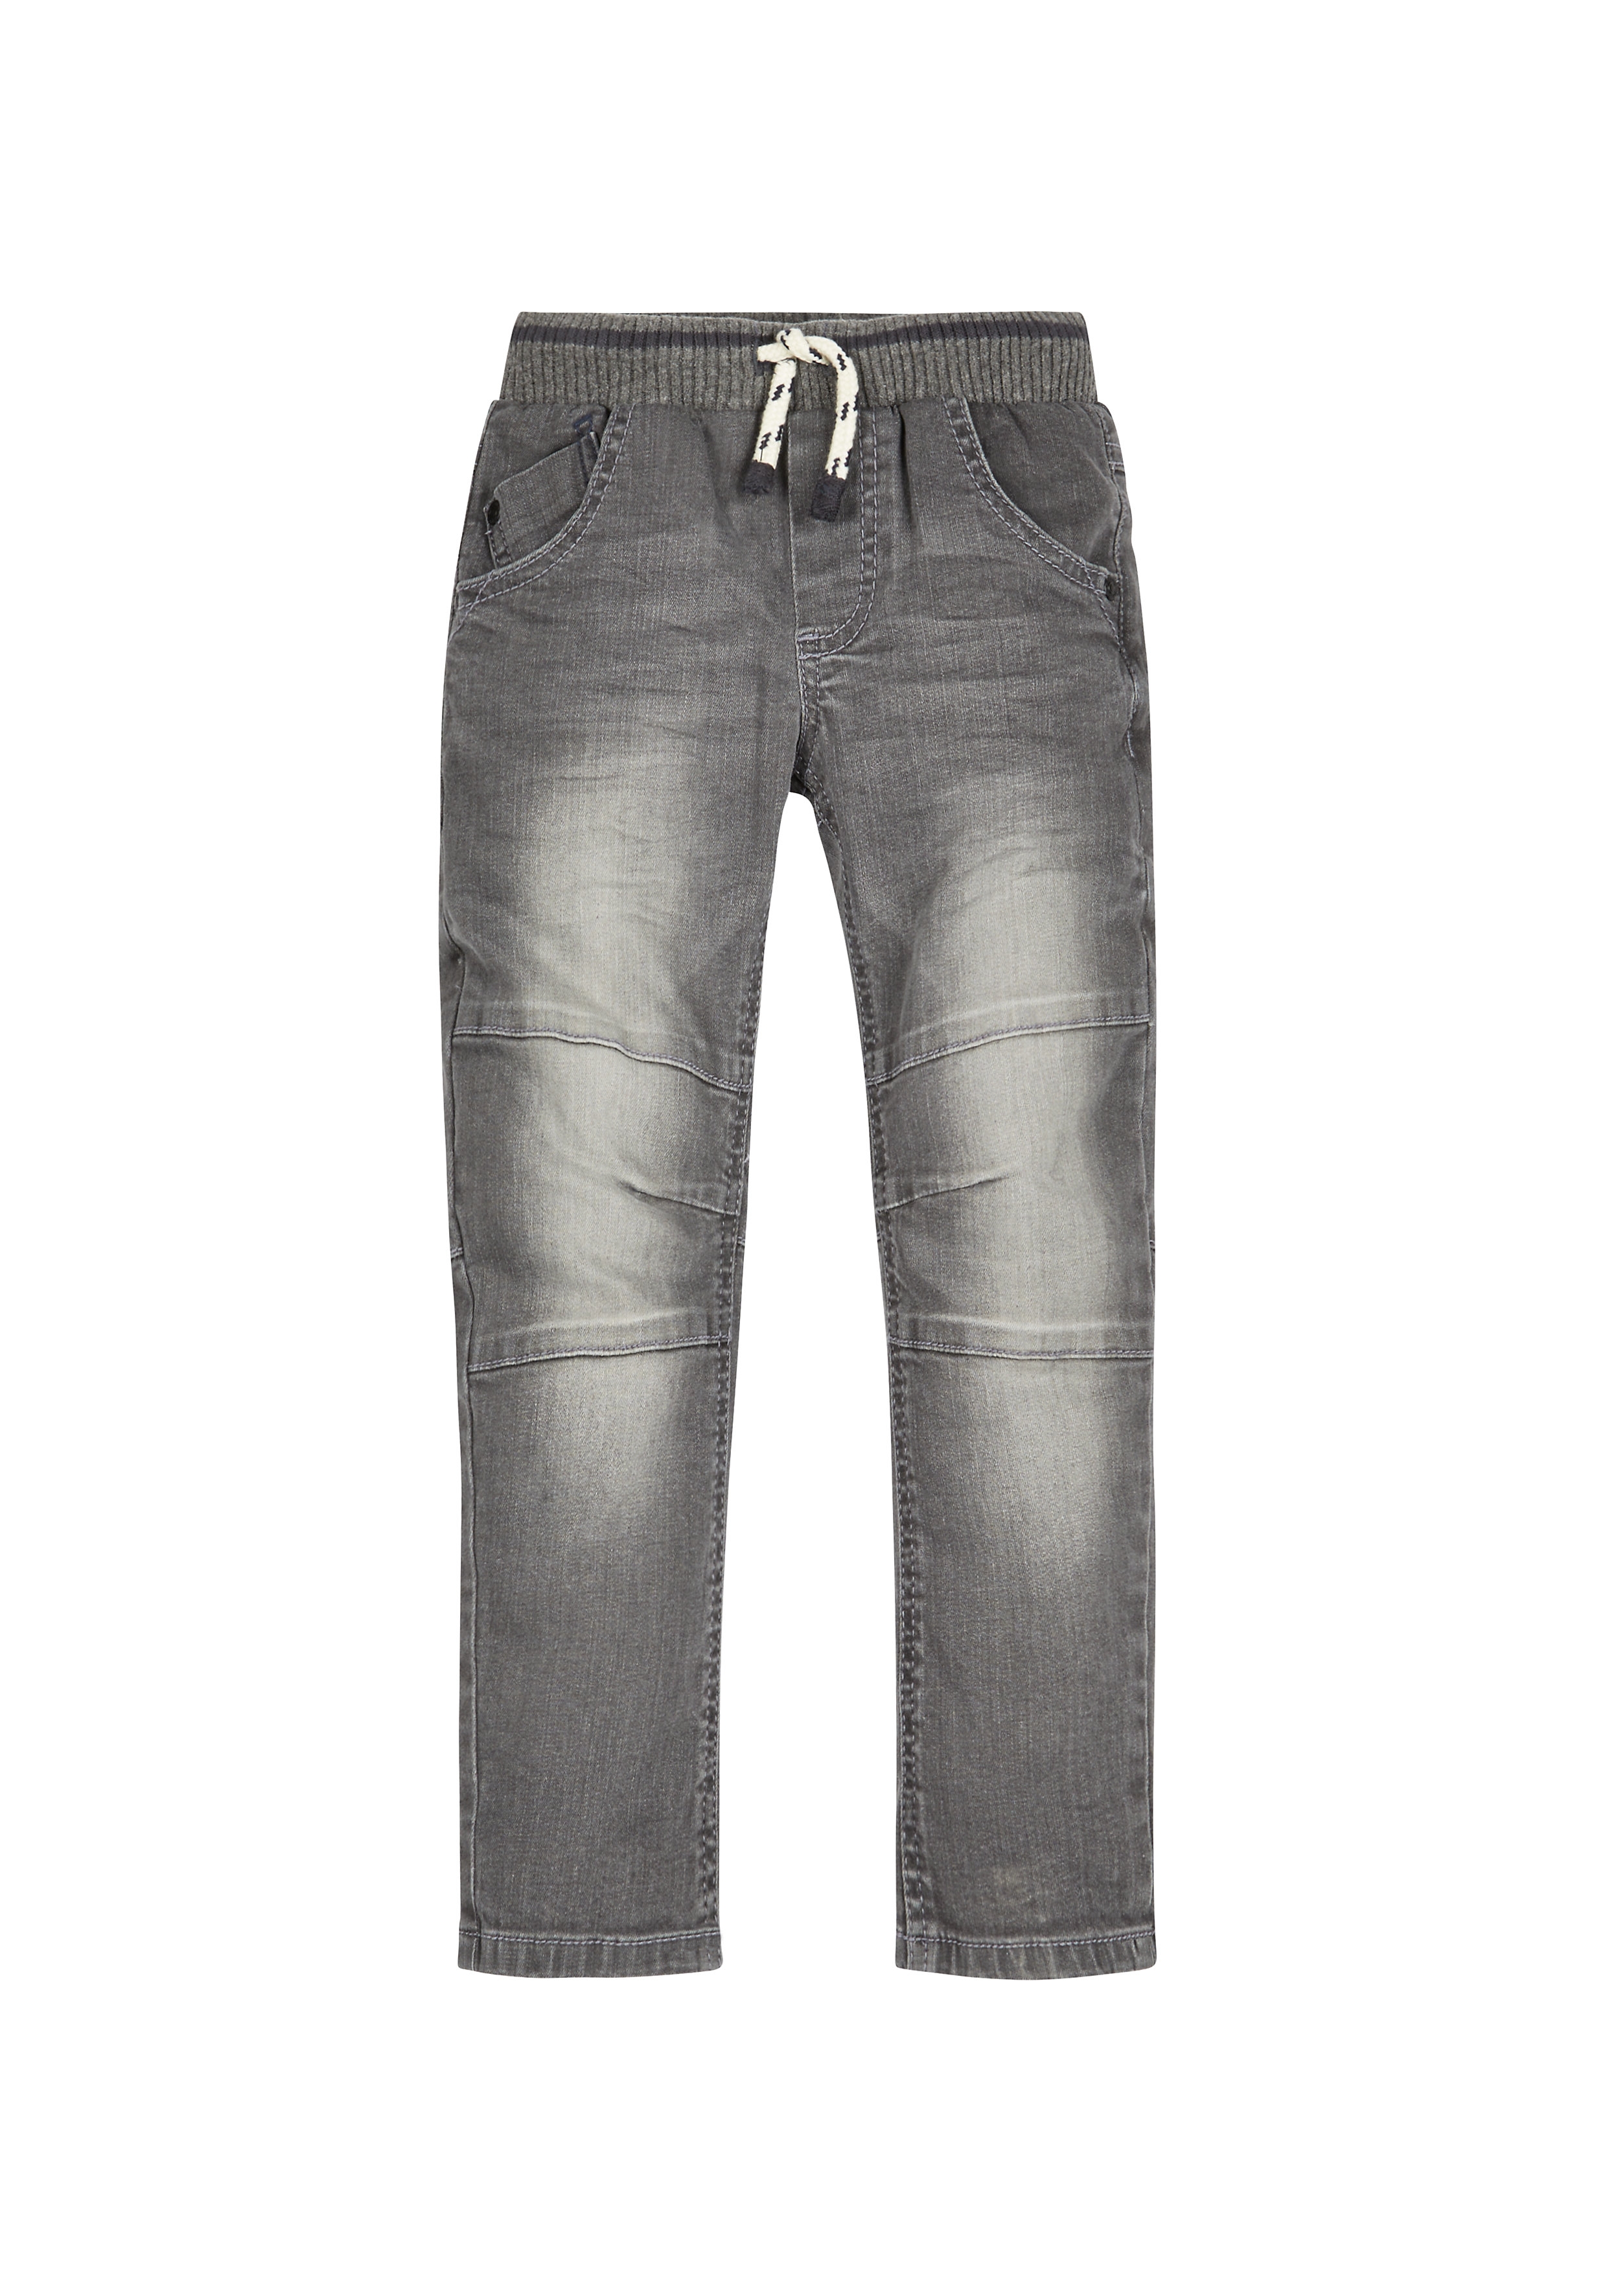 Mothercare | Boys  Ribbed Waist Panel Jeans - Grey